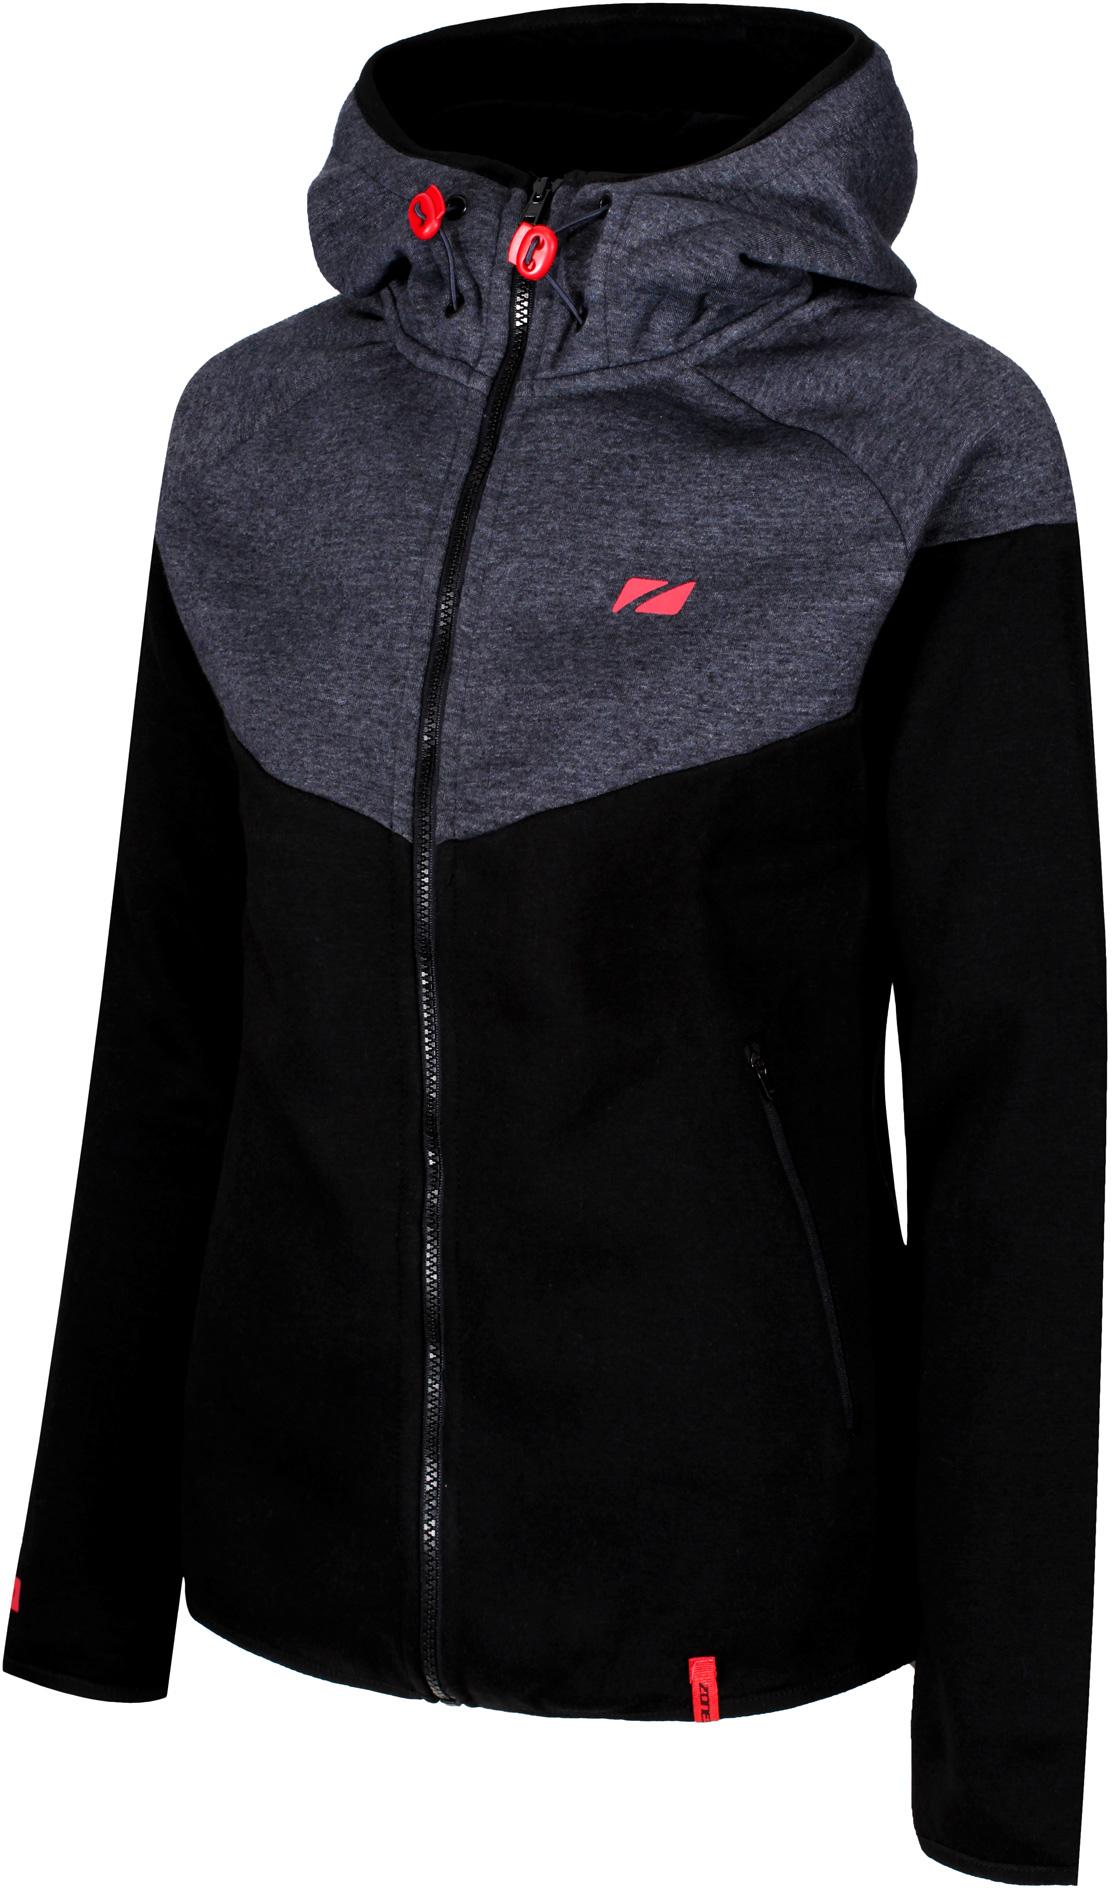 Zone3 Womens Cotton Casual Hoodie - Black/grey/coral